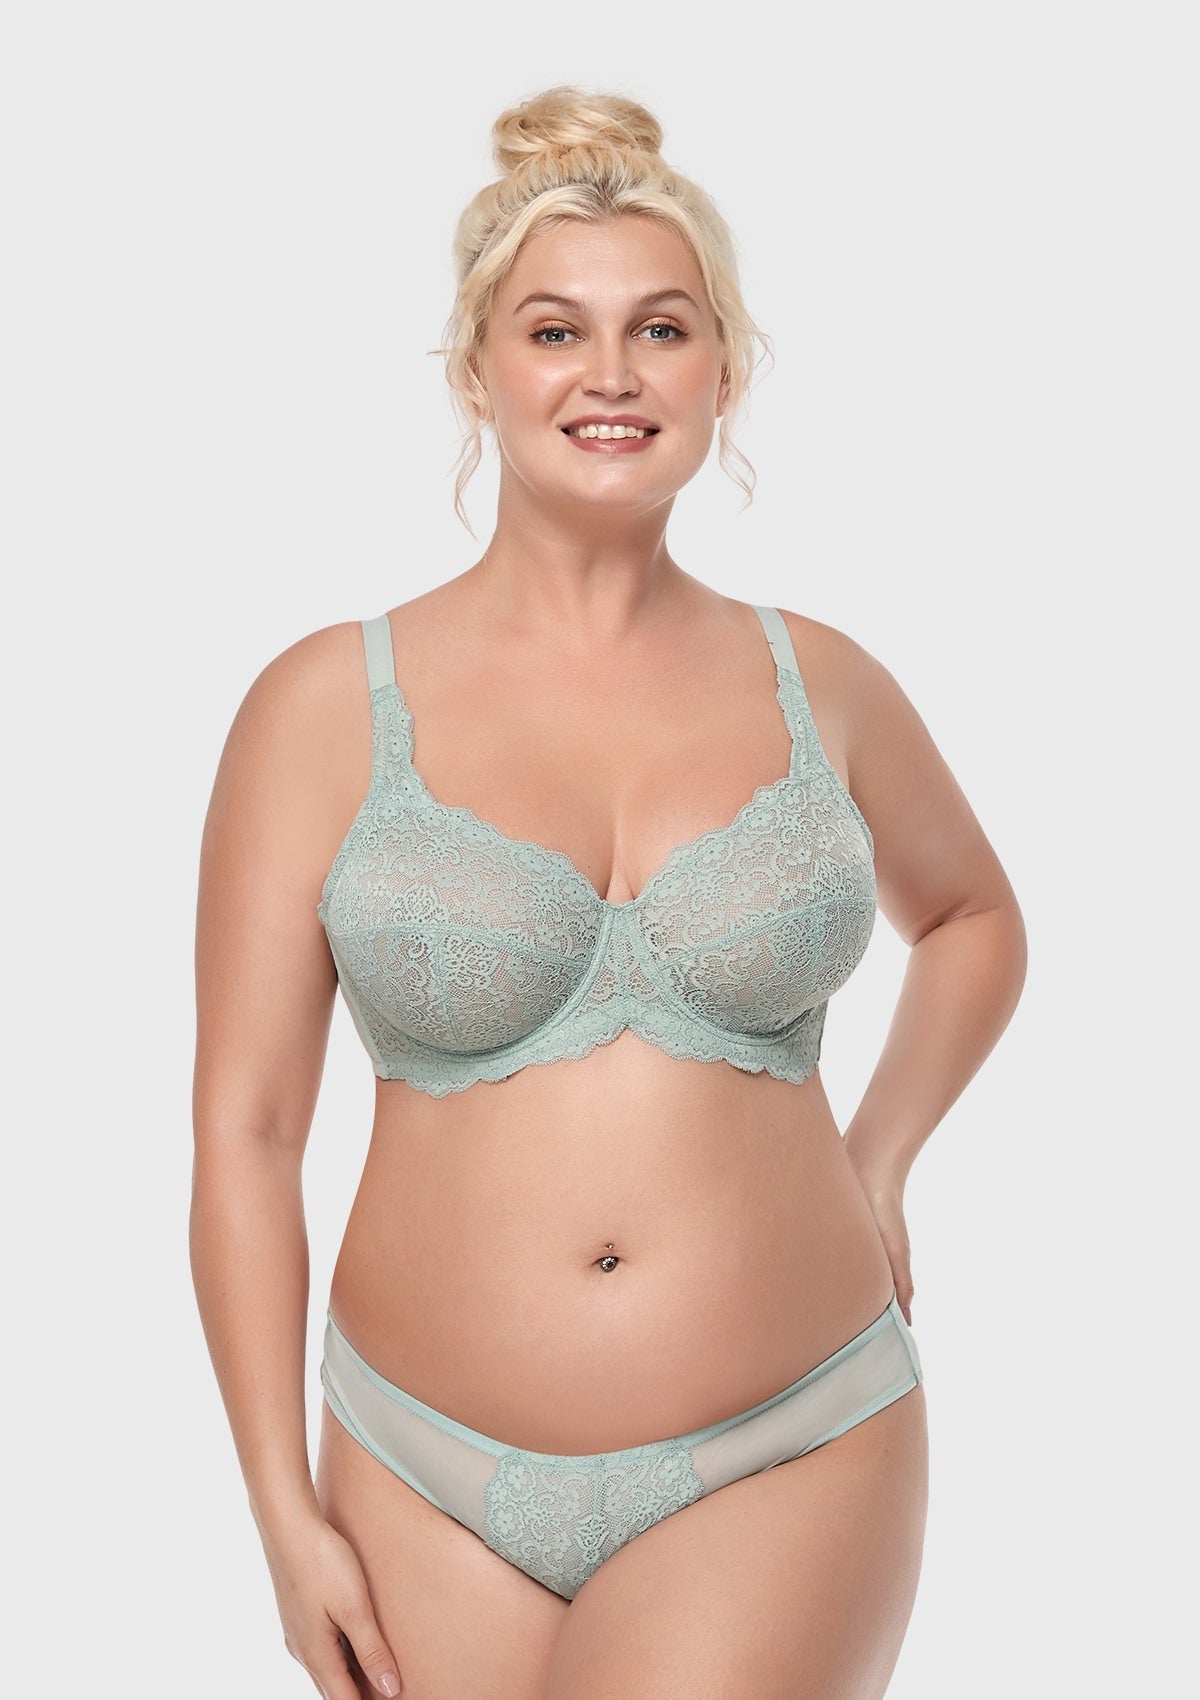 HSIA All-Over Floral Lace: Best Bra For Elderly With Sagging Breasts - Crystal Blue / 38 / DDD/F